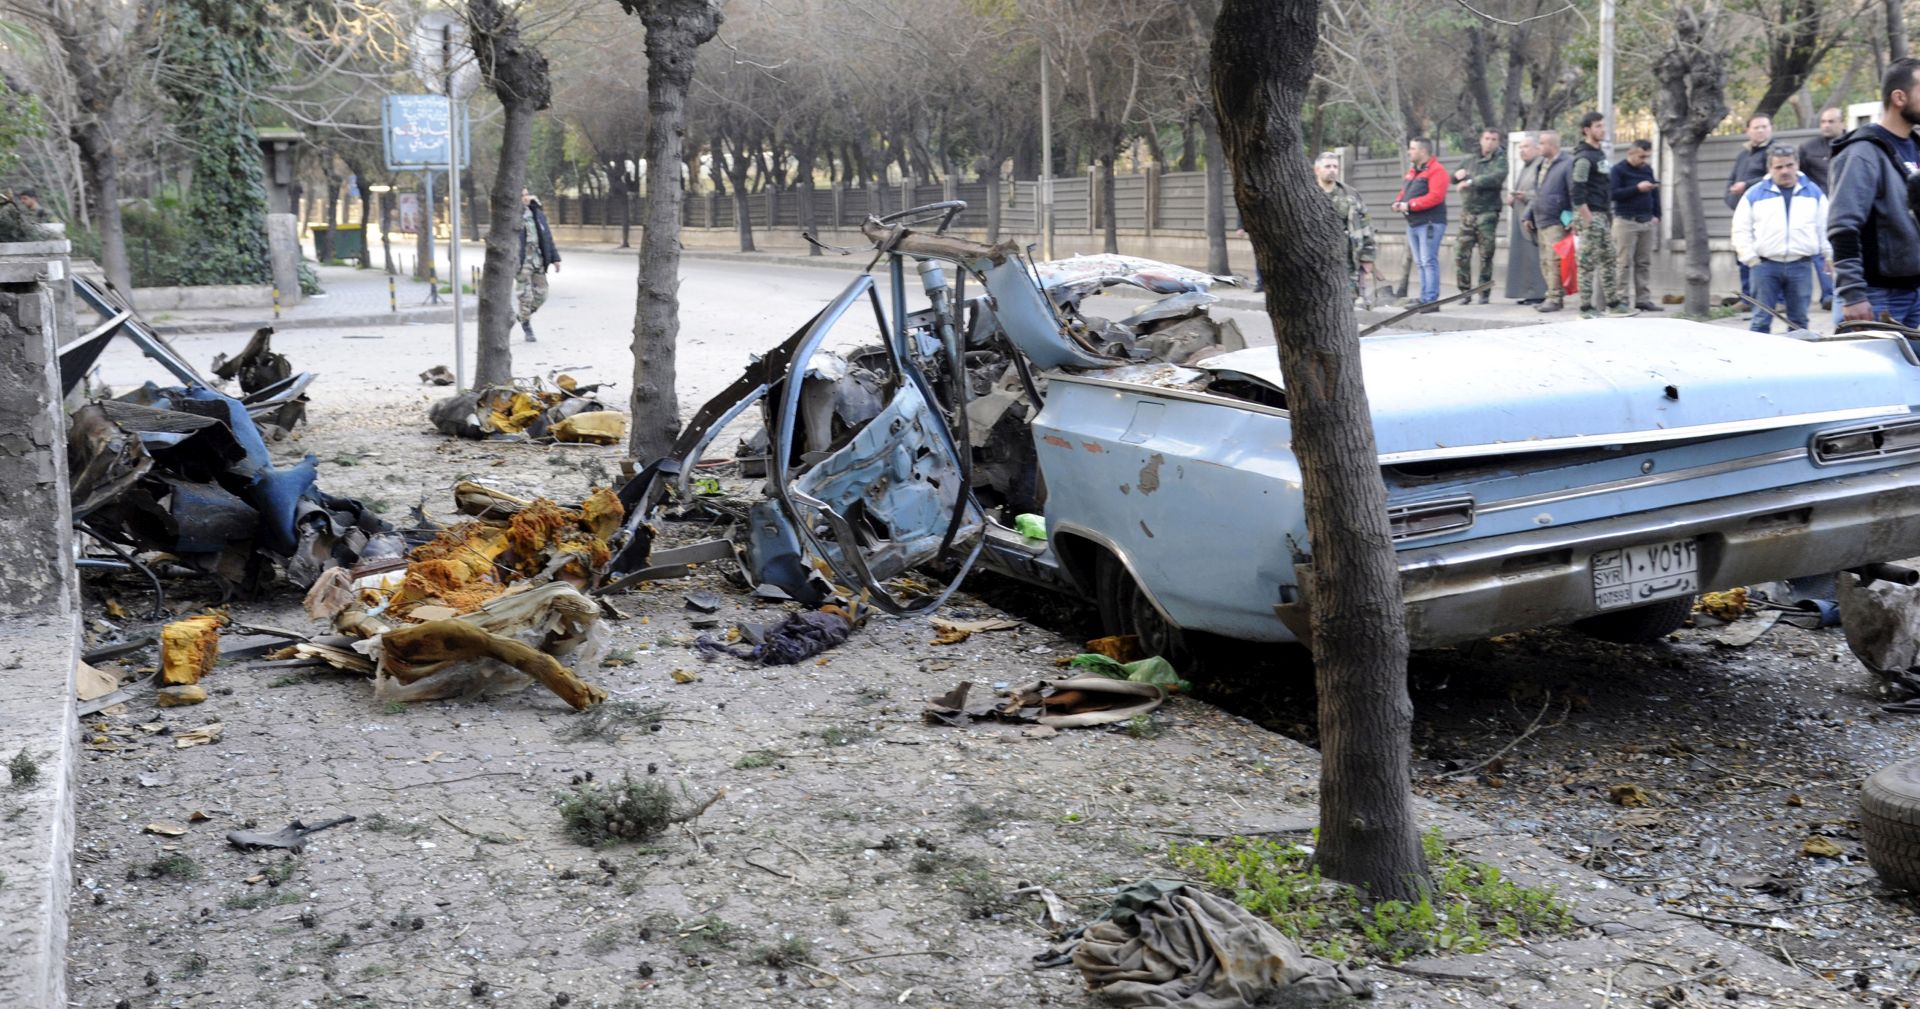 epa07316091 A handout photo made available by the Syrian Arab News Agency (SANA) shows the remains of a car following a blast that took place in al-Adawi area in Damascus, Syria, 24 January 2019. An explosive device planted to a car, causing material damage, and no causalities were reported, according to SANA.  EPA/SANA HANDOUT  HANDOUT EDITORIAL USE ONLY/NO SALES